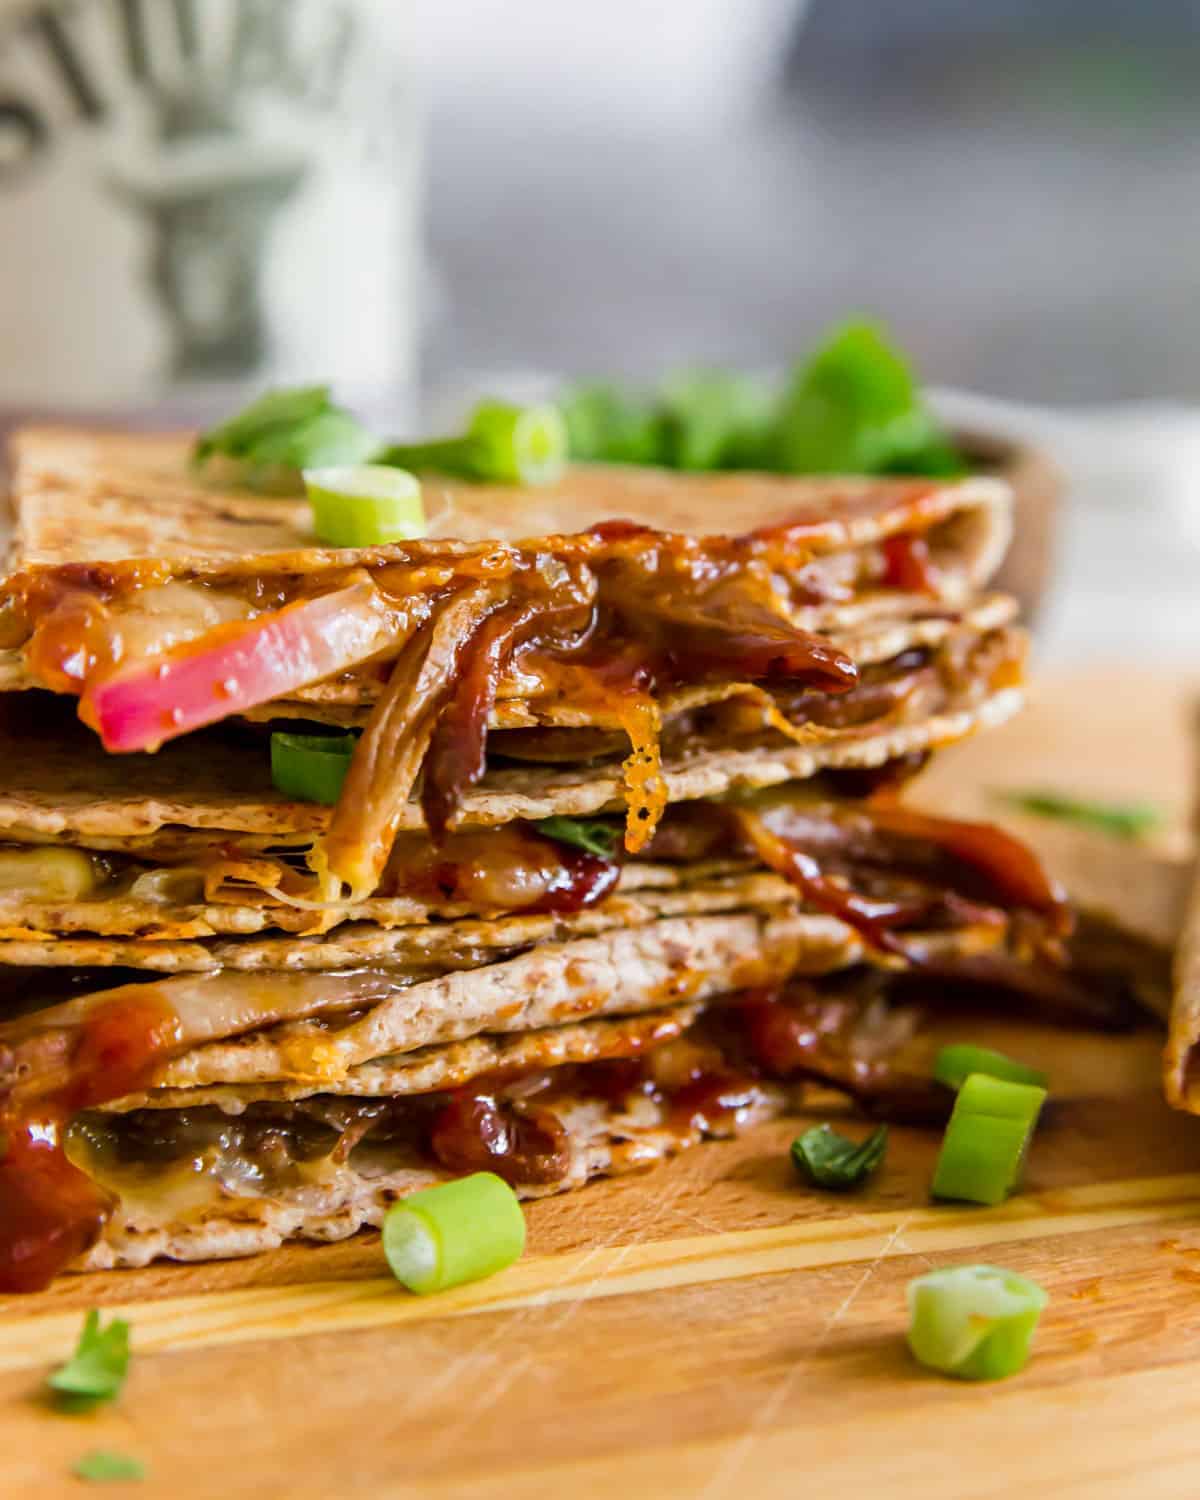 This brisket quesadilla is the ultimate way to use up brisket leftovers. Melted cheddar, red onions and smoky BBQ sauce are stuffed in a brisket filled tortilla with crispy edges and a gooey delicious center.